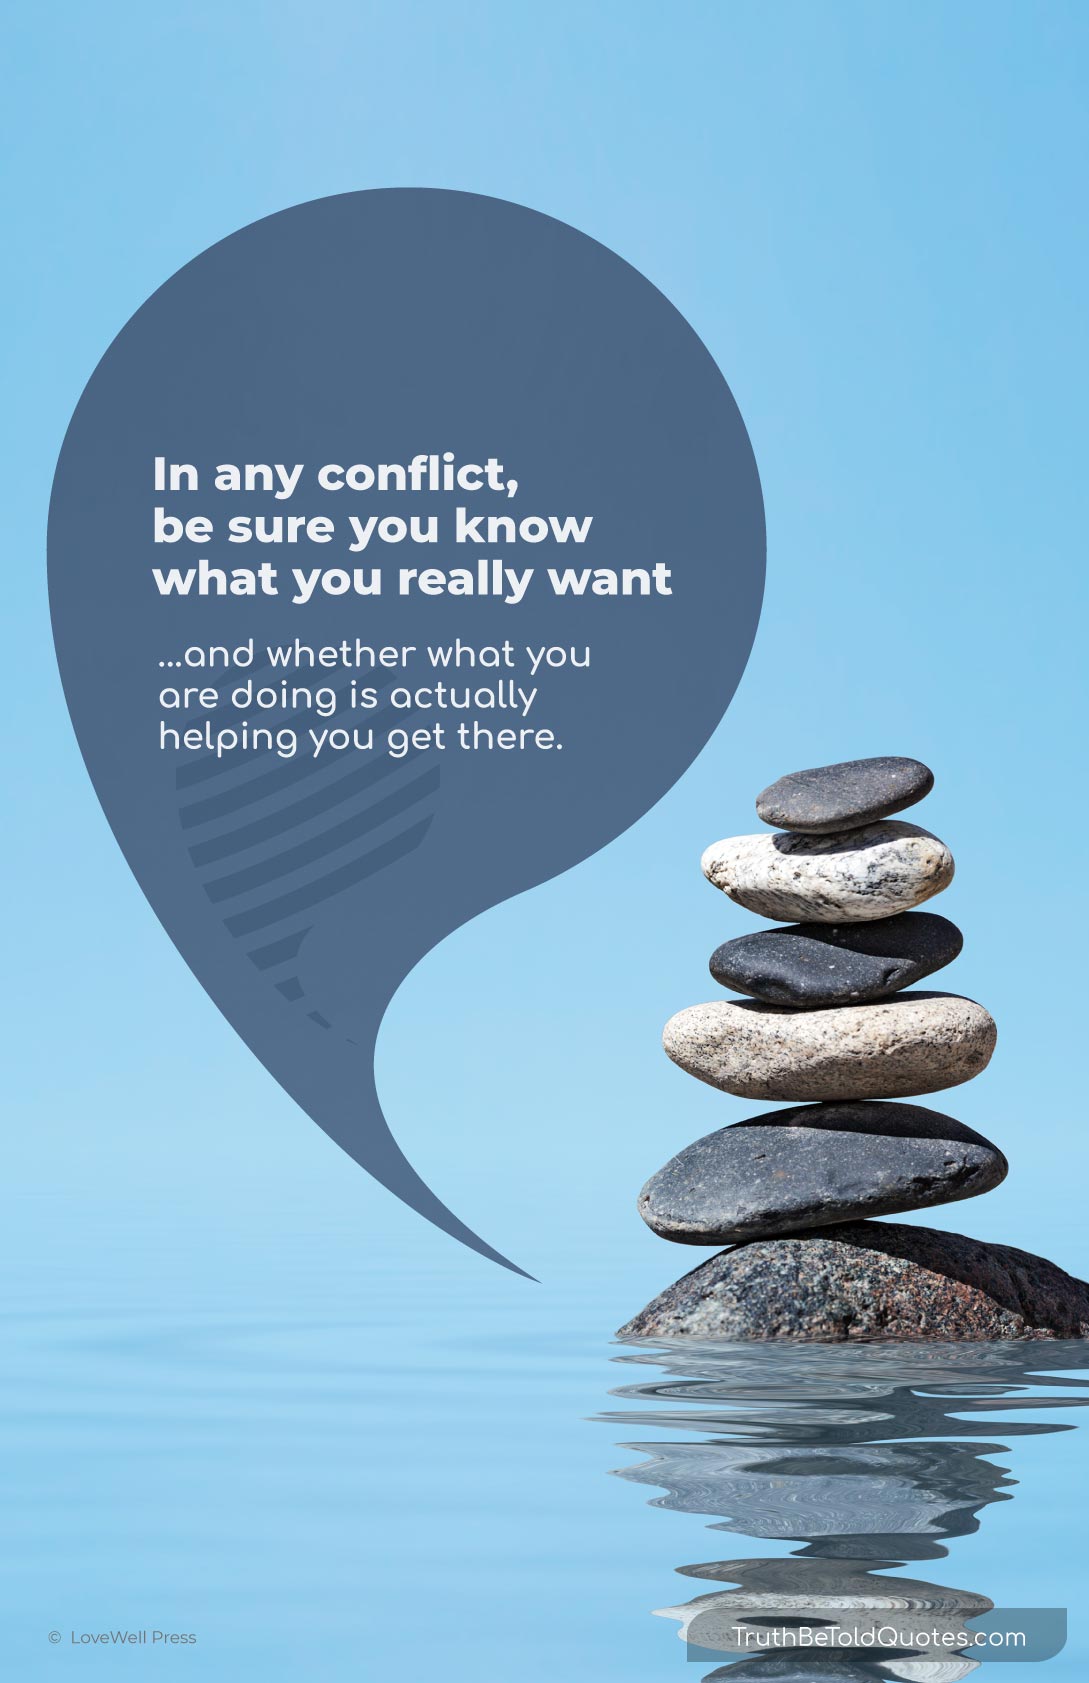 Quote for teens on conflict resolution: 'In any conflict, be sure you know what you really want...'